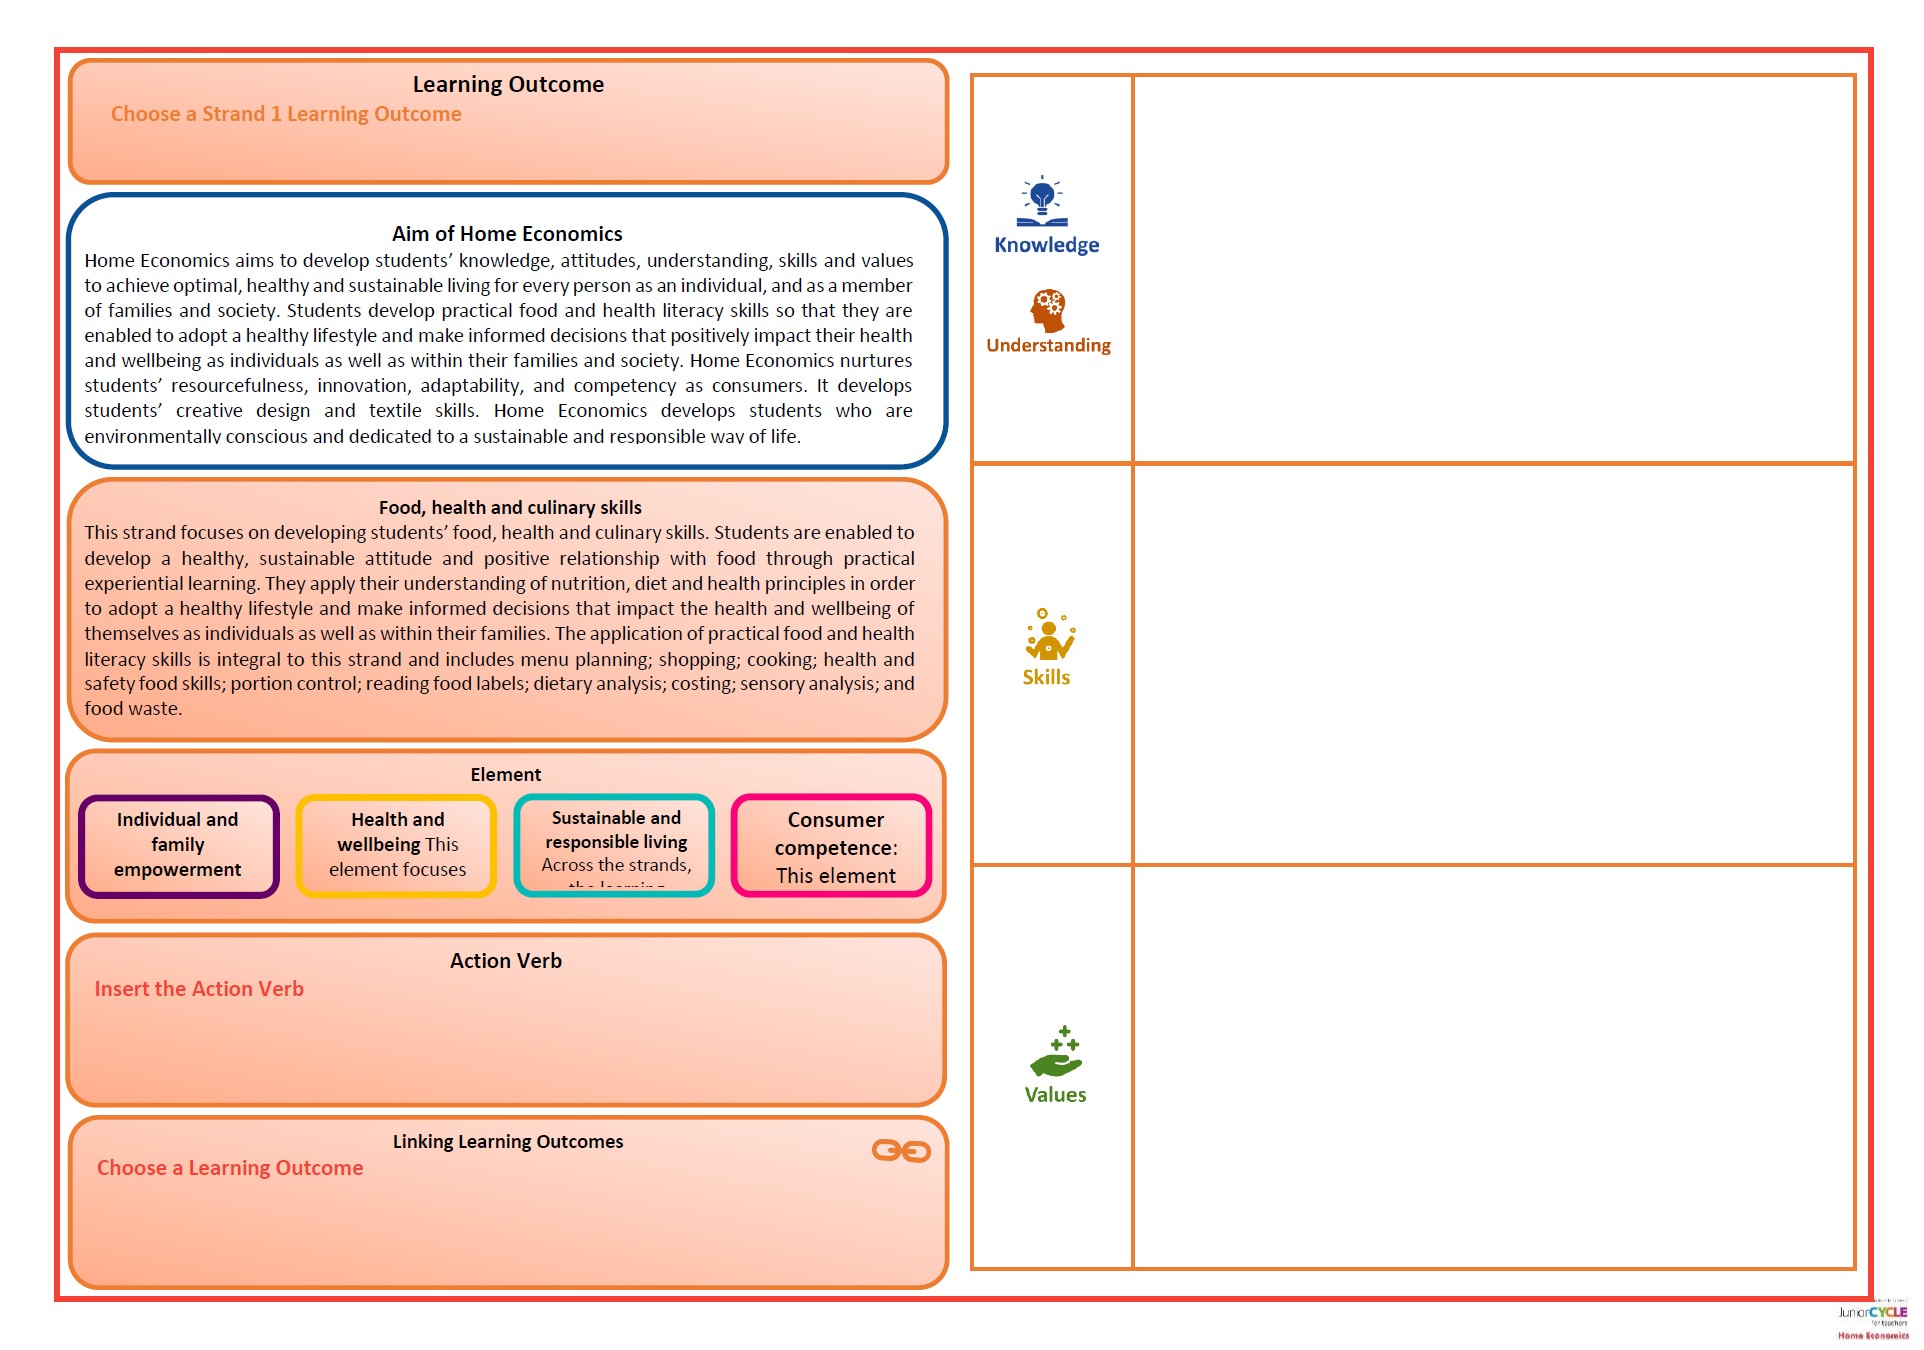 Home Economics Exploring Learning Outcomes Template Strand 1